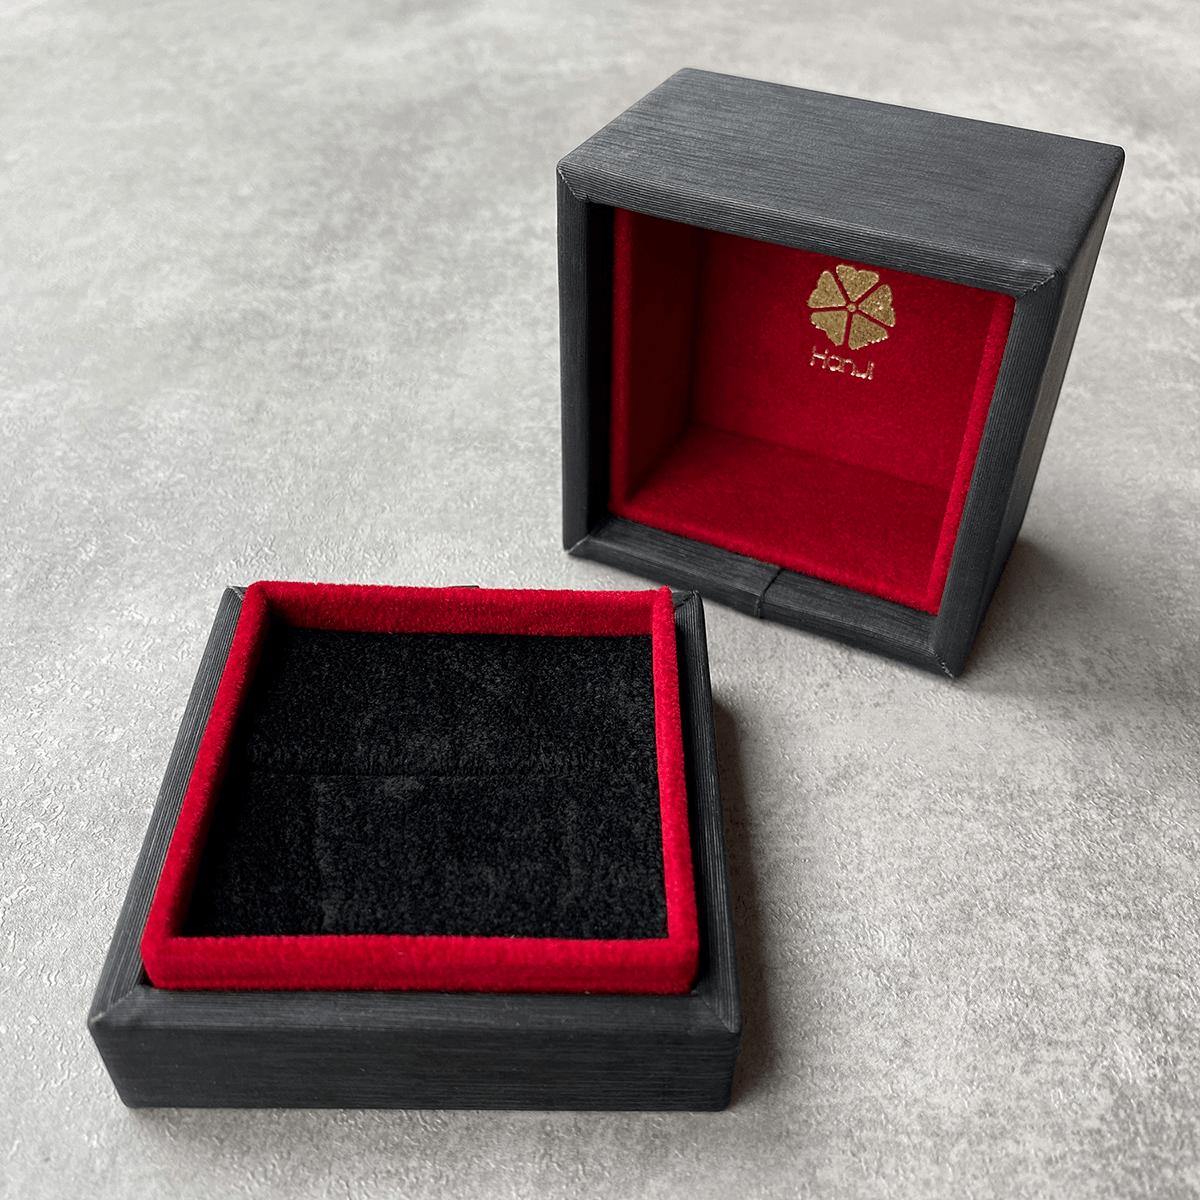 Luxury black and red wedding ring engagement ring box